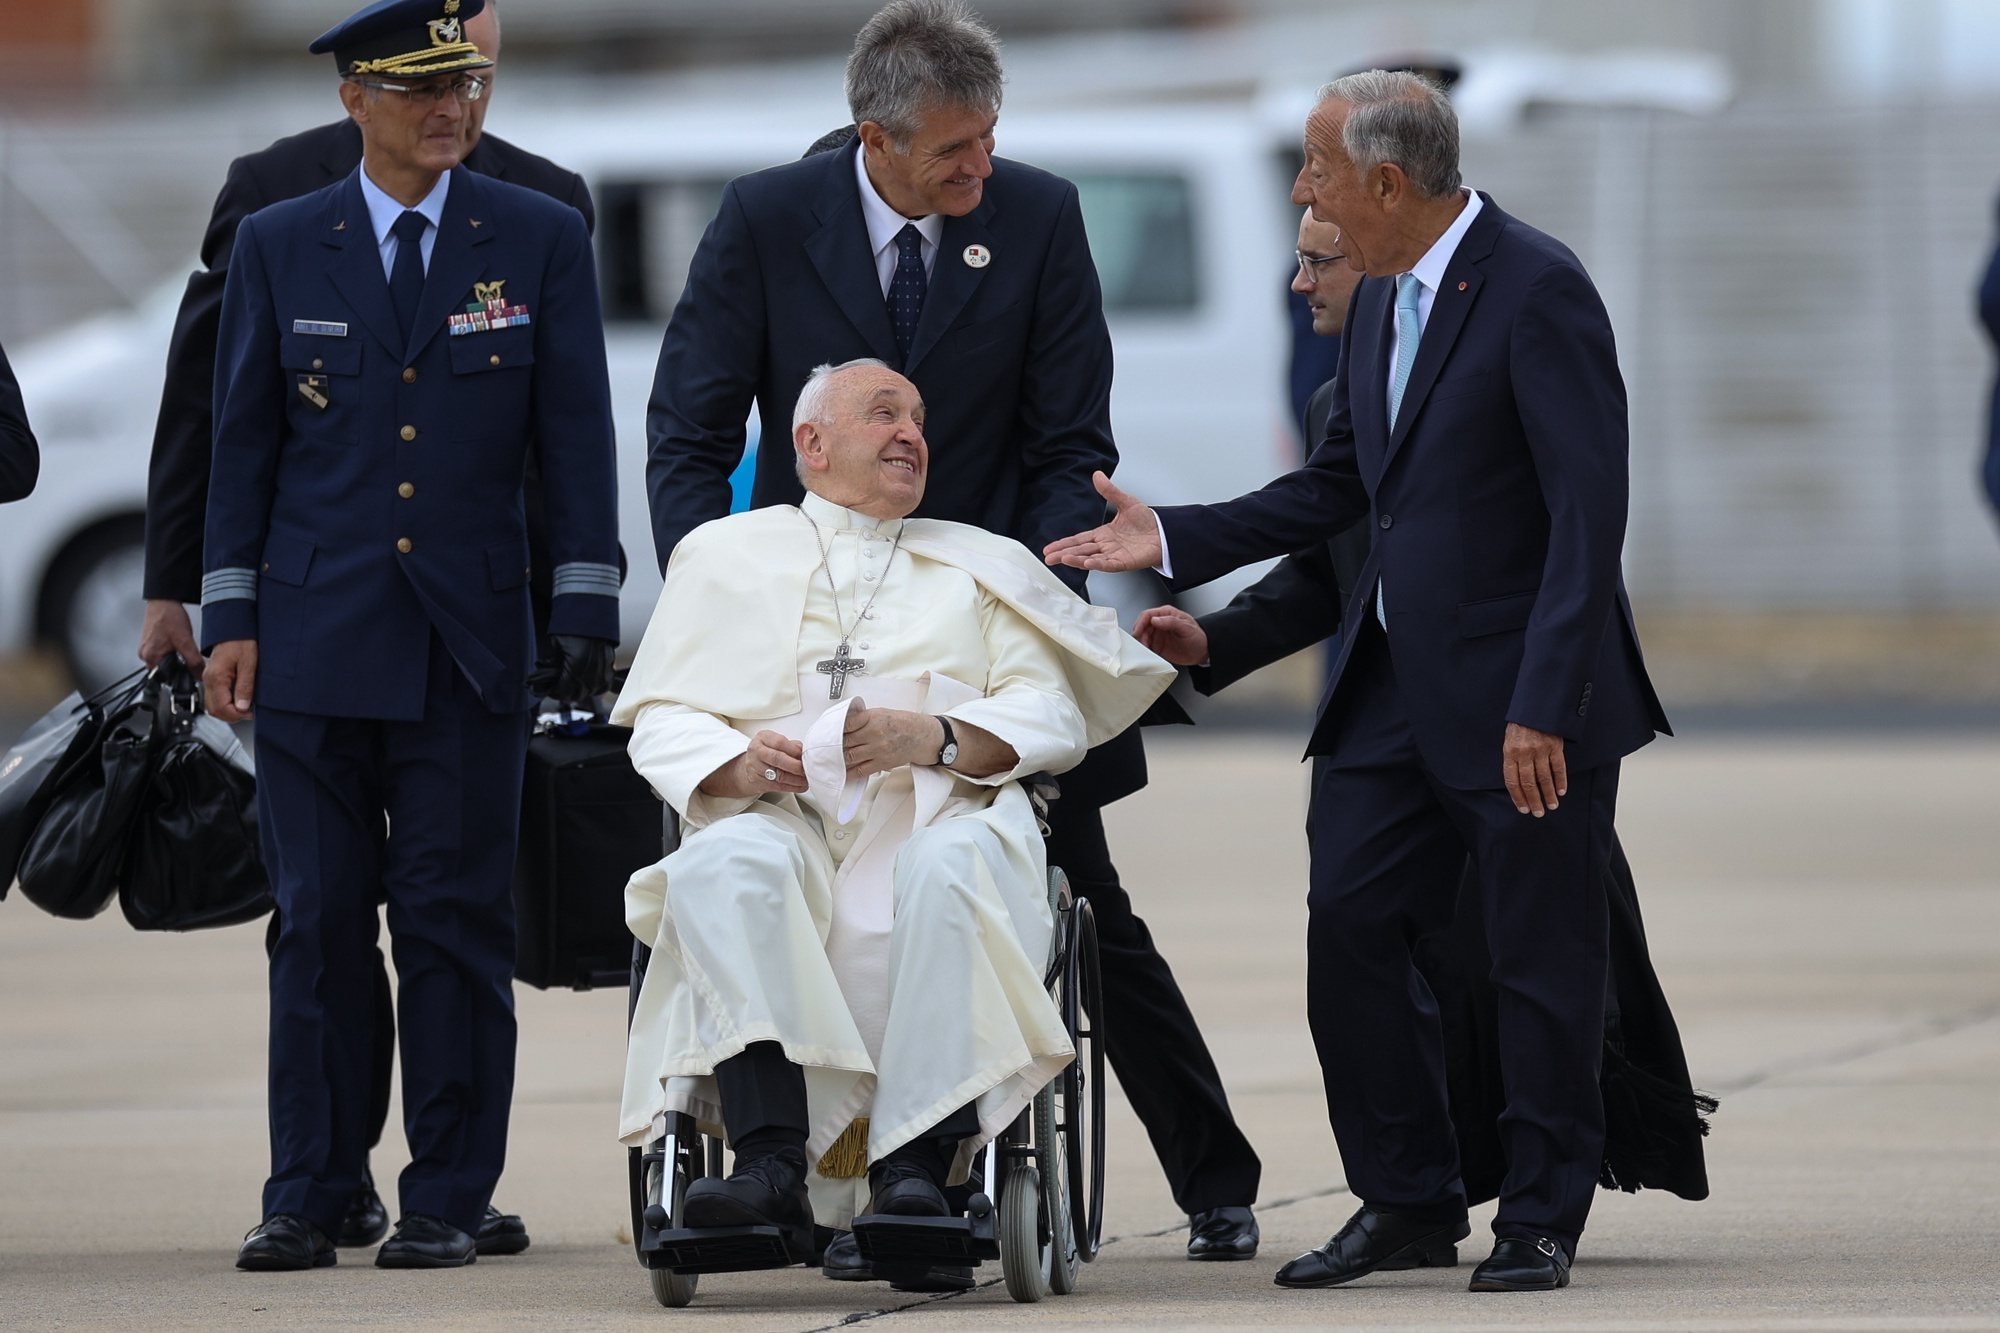 Pope Francis upon his arrival at Figo Maduro airbase is welcomed by Portugal&#039;s Presidente Marcelo Rebelo de Sousa (R) in Lisbon, Portugal, 02 August 2023. The Pontiff will be in Portugal on the occasion of World Youth Day (WYD), one of the main events of the Church that gathers the Pope with youngsters from around the world, that takes place until 06 August. ANTONIO COTRIM/LUSA/POOL